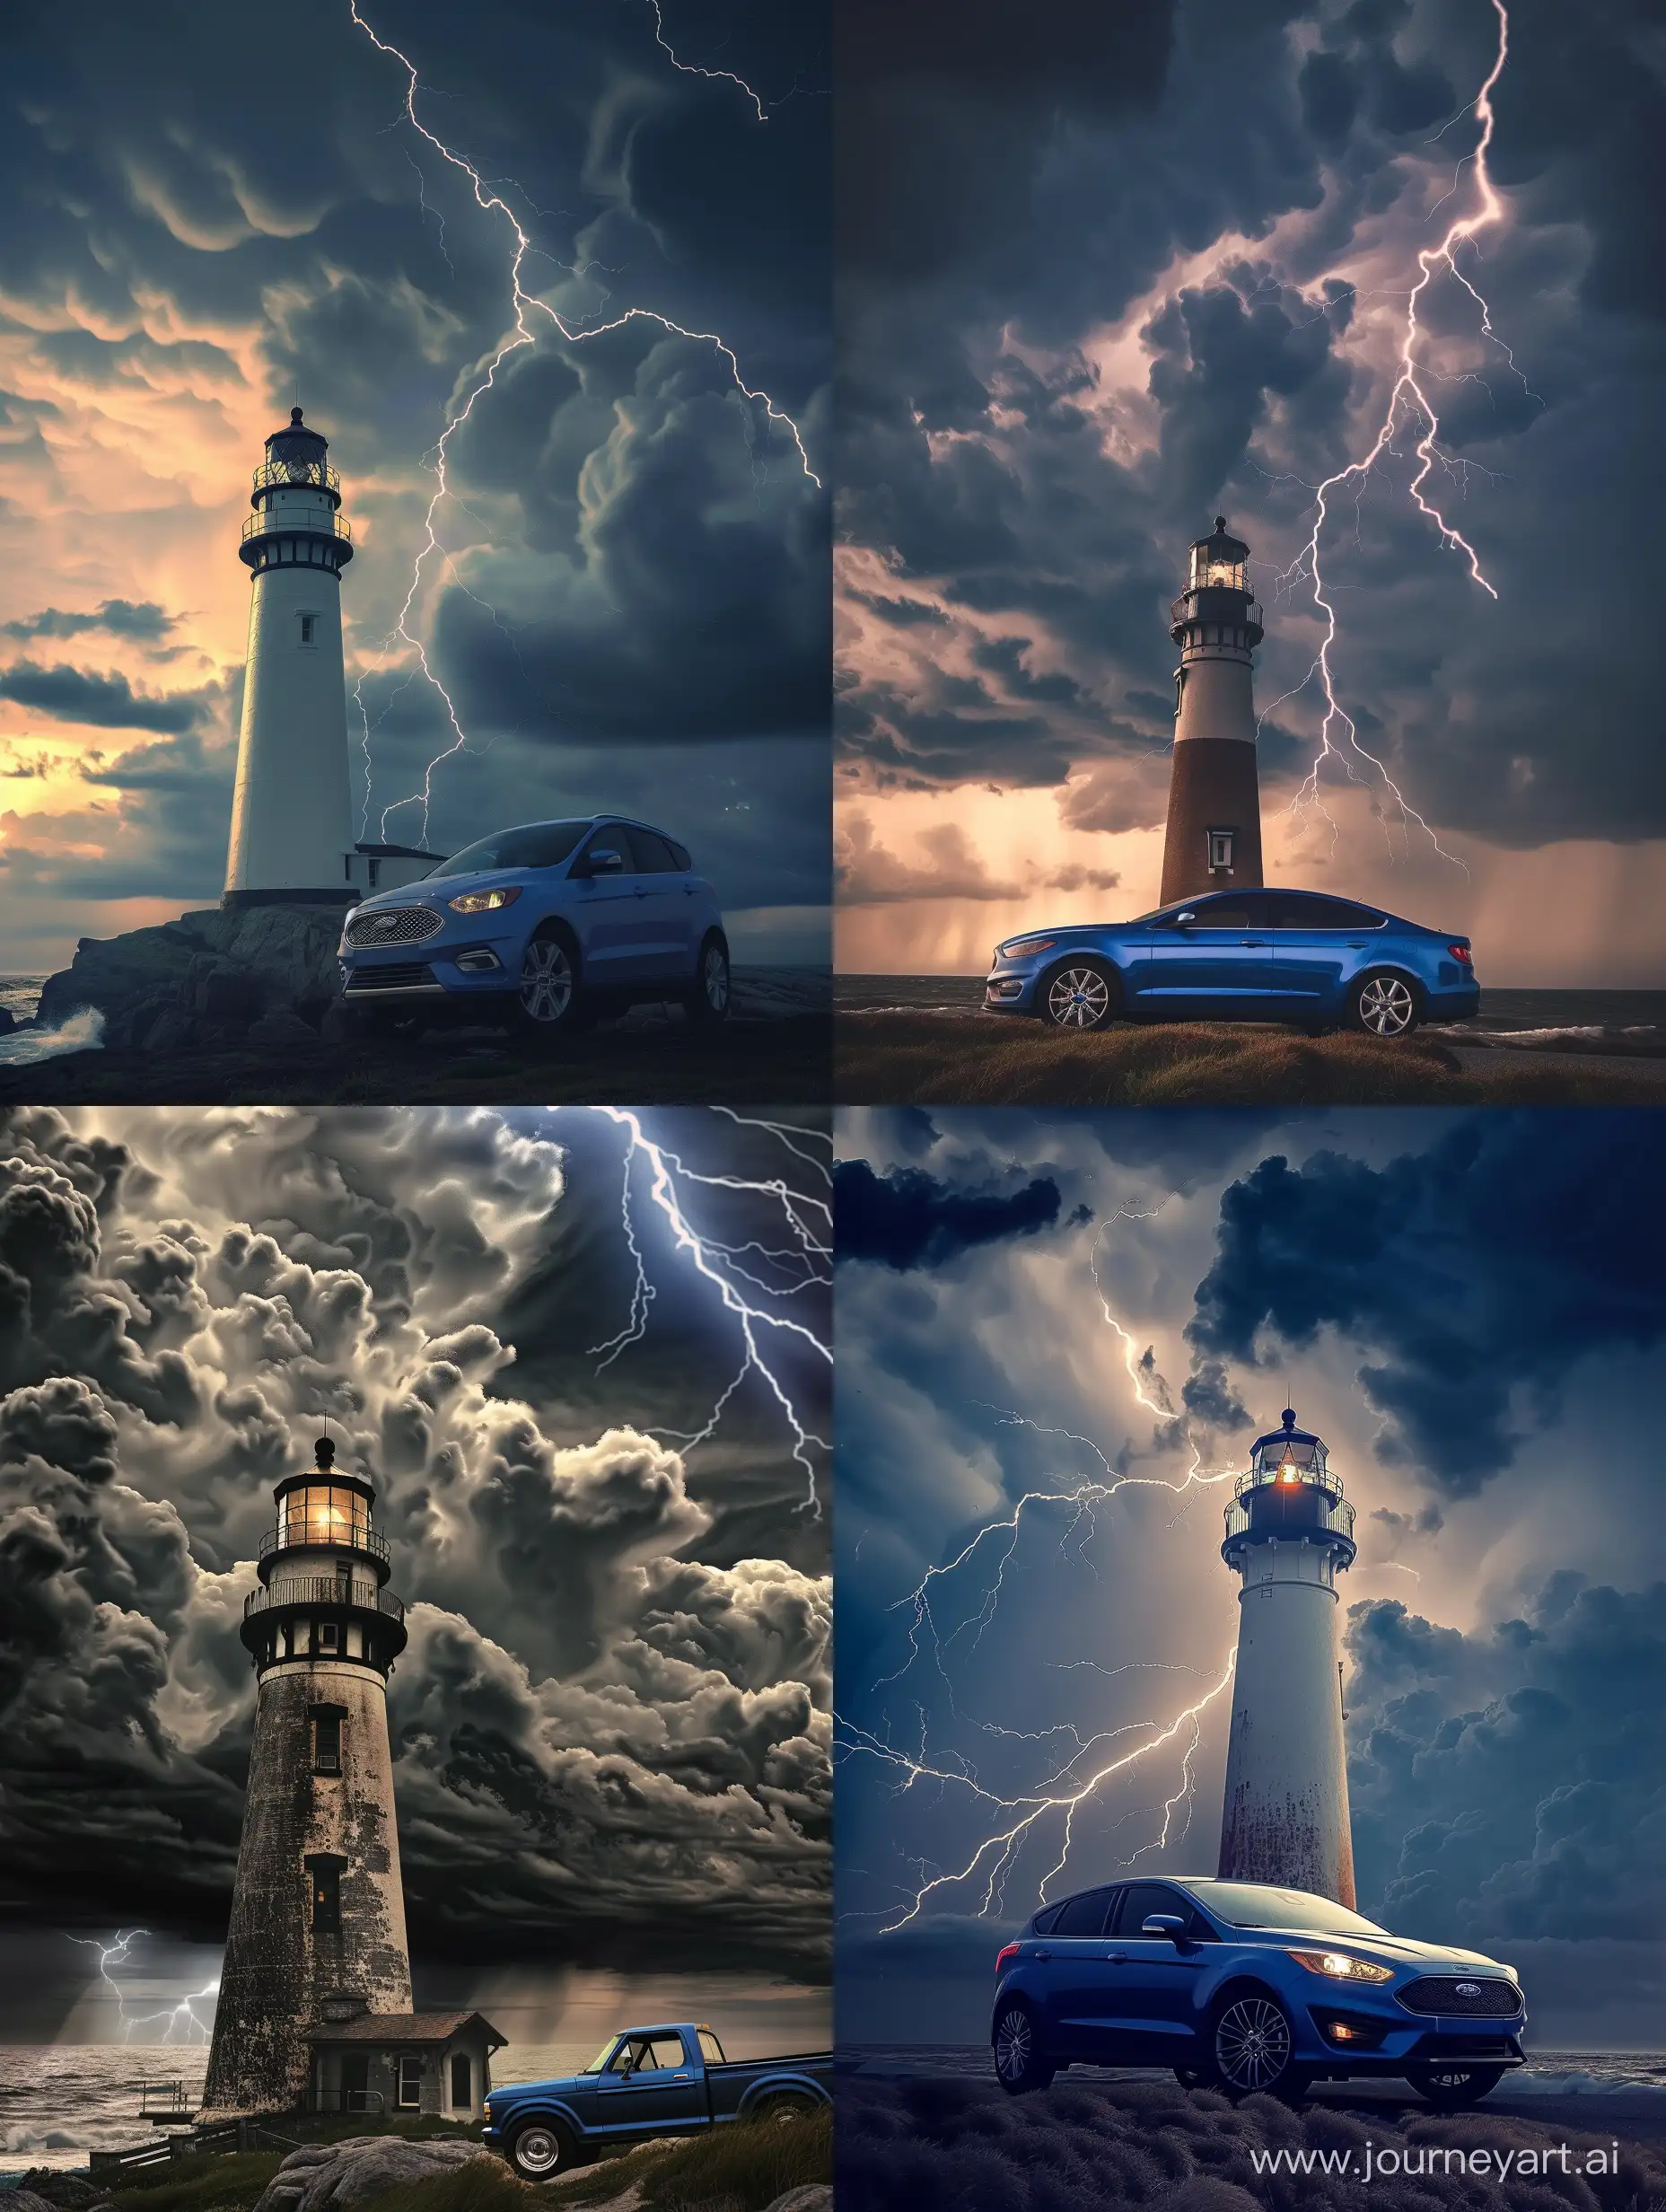 Lighthouse-in-Storm-Dramatic-Seascape-with-Lightning-and-Blue-Ford